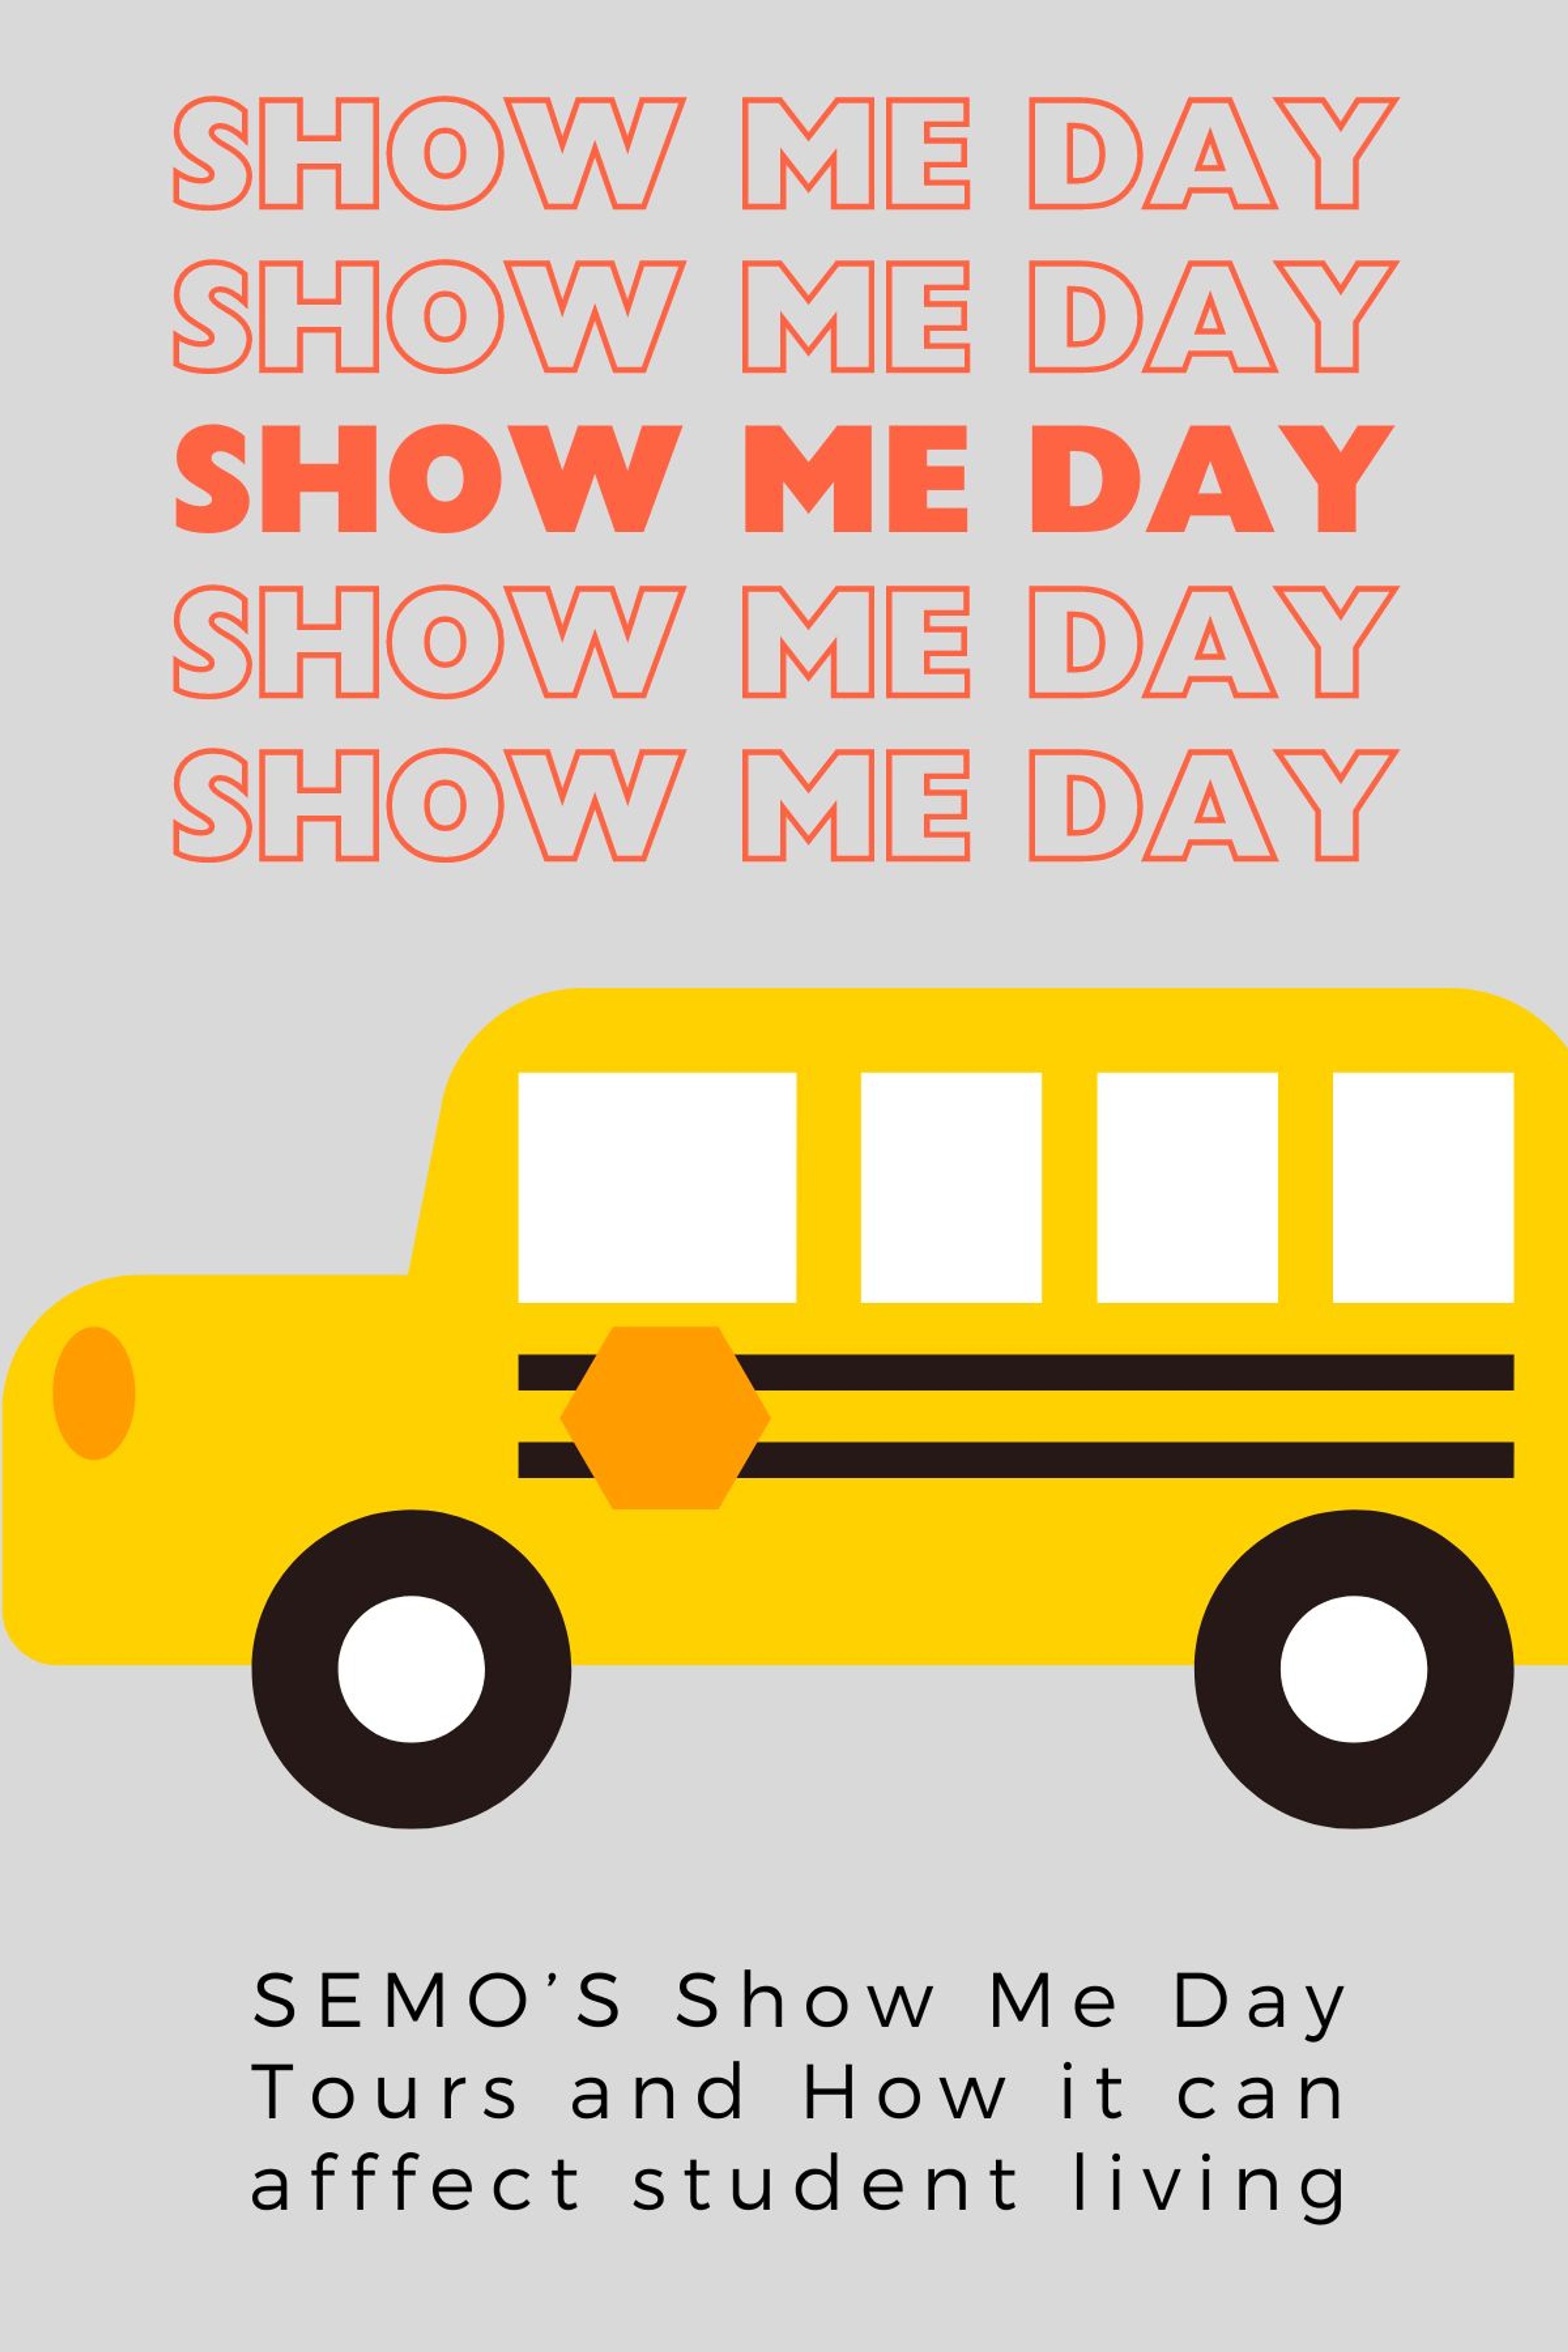 Show Me Day: Is the hassle worth it?